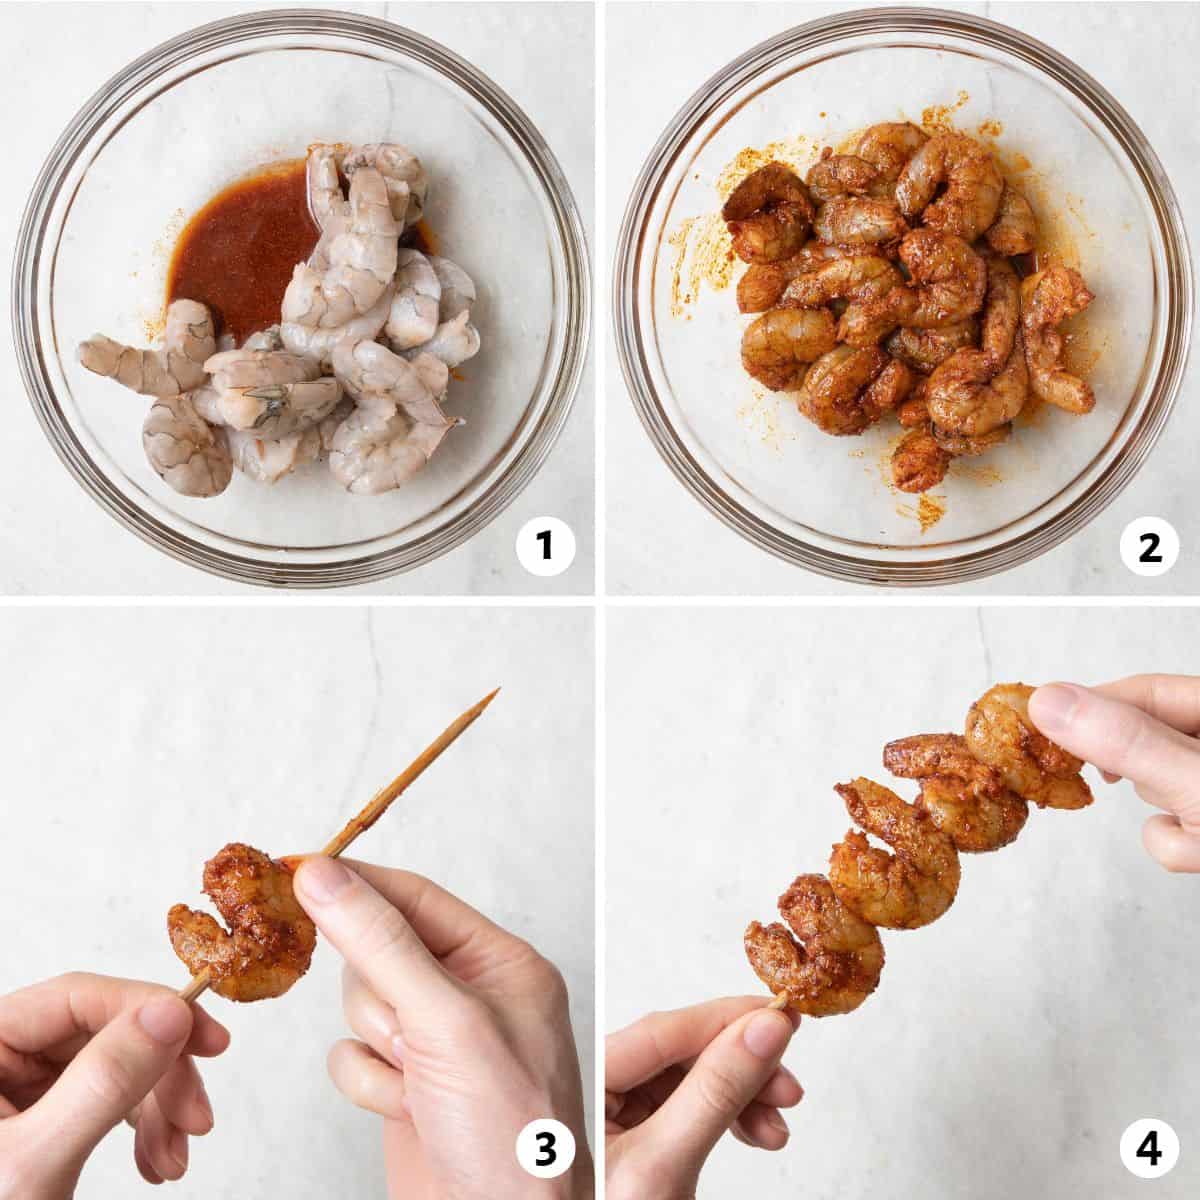 4 image collage preparing recipe: 1- raw shrimp in a bowl with oil and seasoning mixture, 2- shrimp after fully coated, 3- threading one shrimp on a wooden skewer, 4- adding the last shrimp.